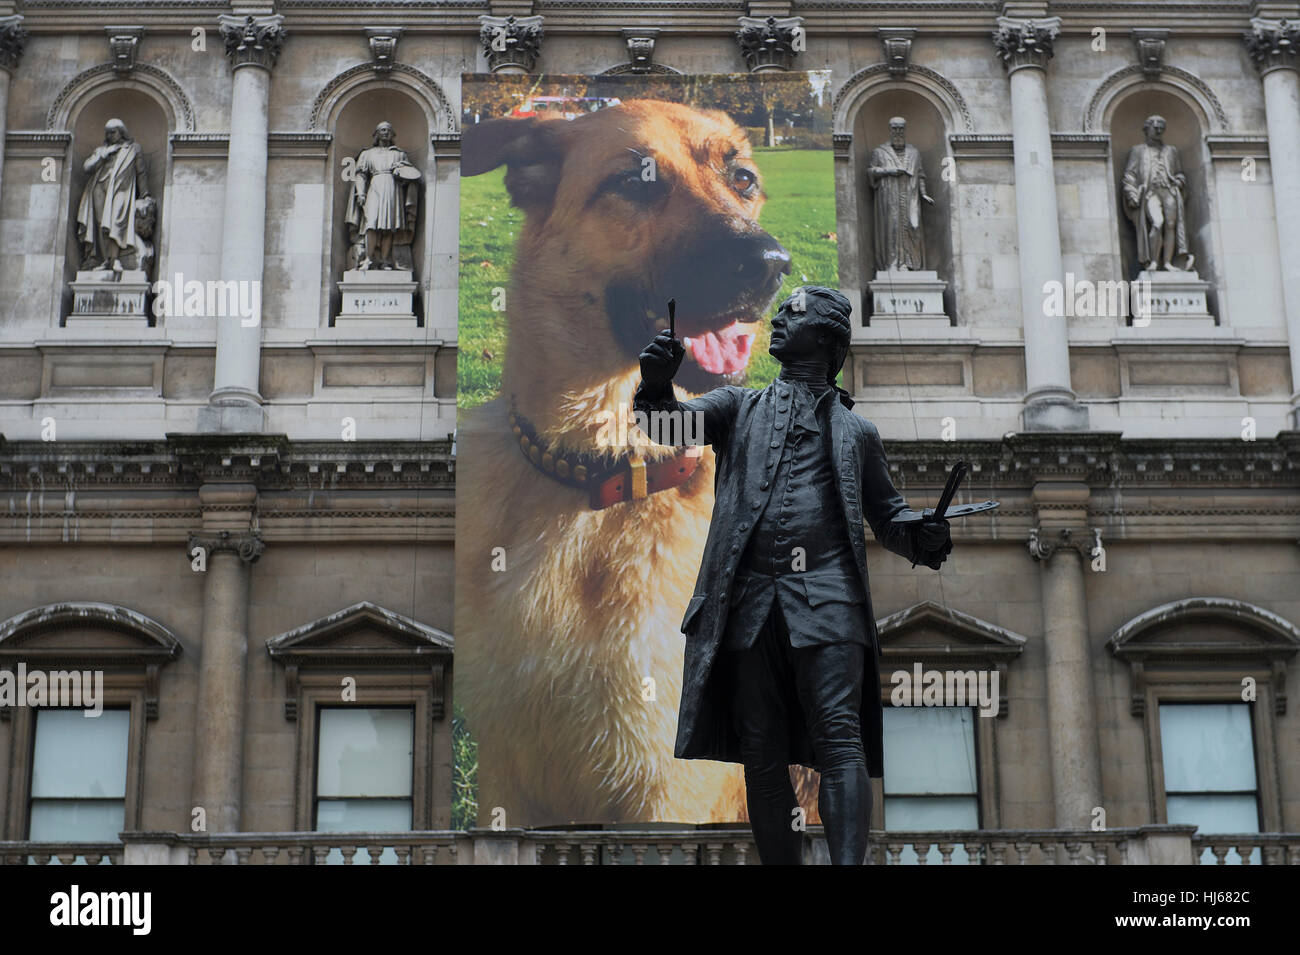 Royal Academy, London, UK. 26th January, 2017. Premiums Interim Projects presents an opportunity to view new work by 13 second year students at the interim point of their postgraduate study at the RA Schools, the UK’s longest established art school. German Shepherd for Burlington House (Artist Gina Fischli) exhibited outside the RA. © Malcolm Park editorial/Alamy Live News. Stock Photo